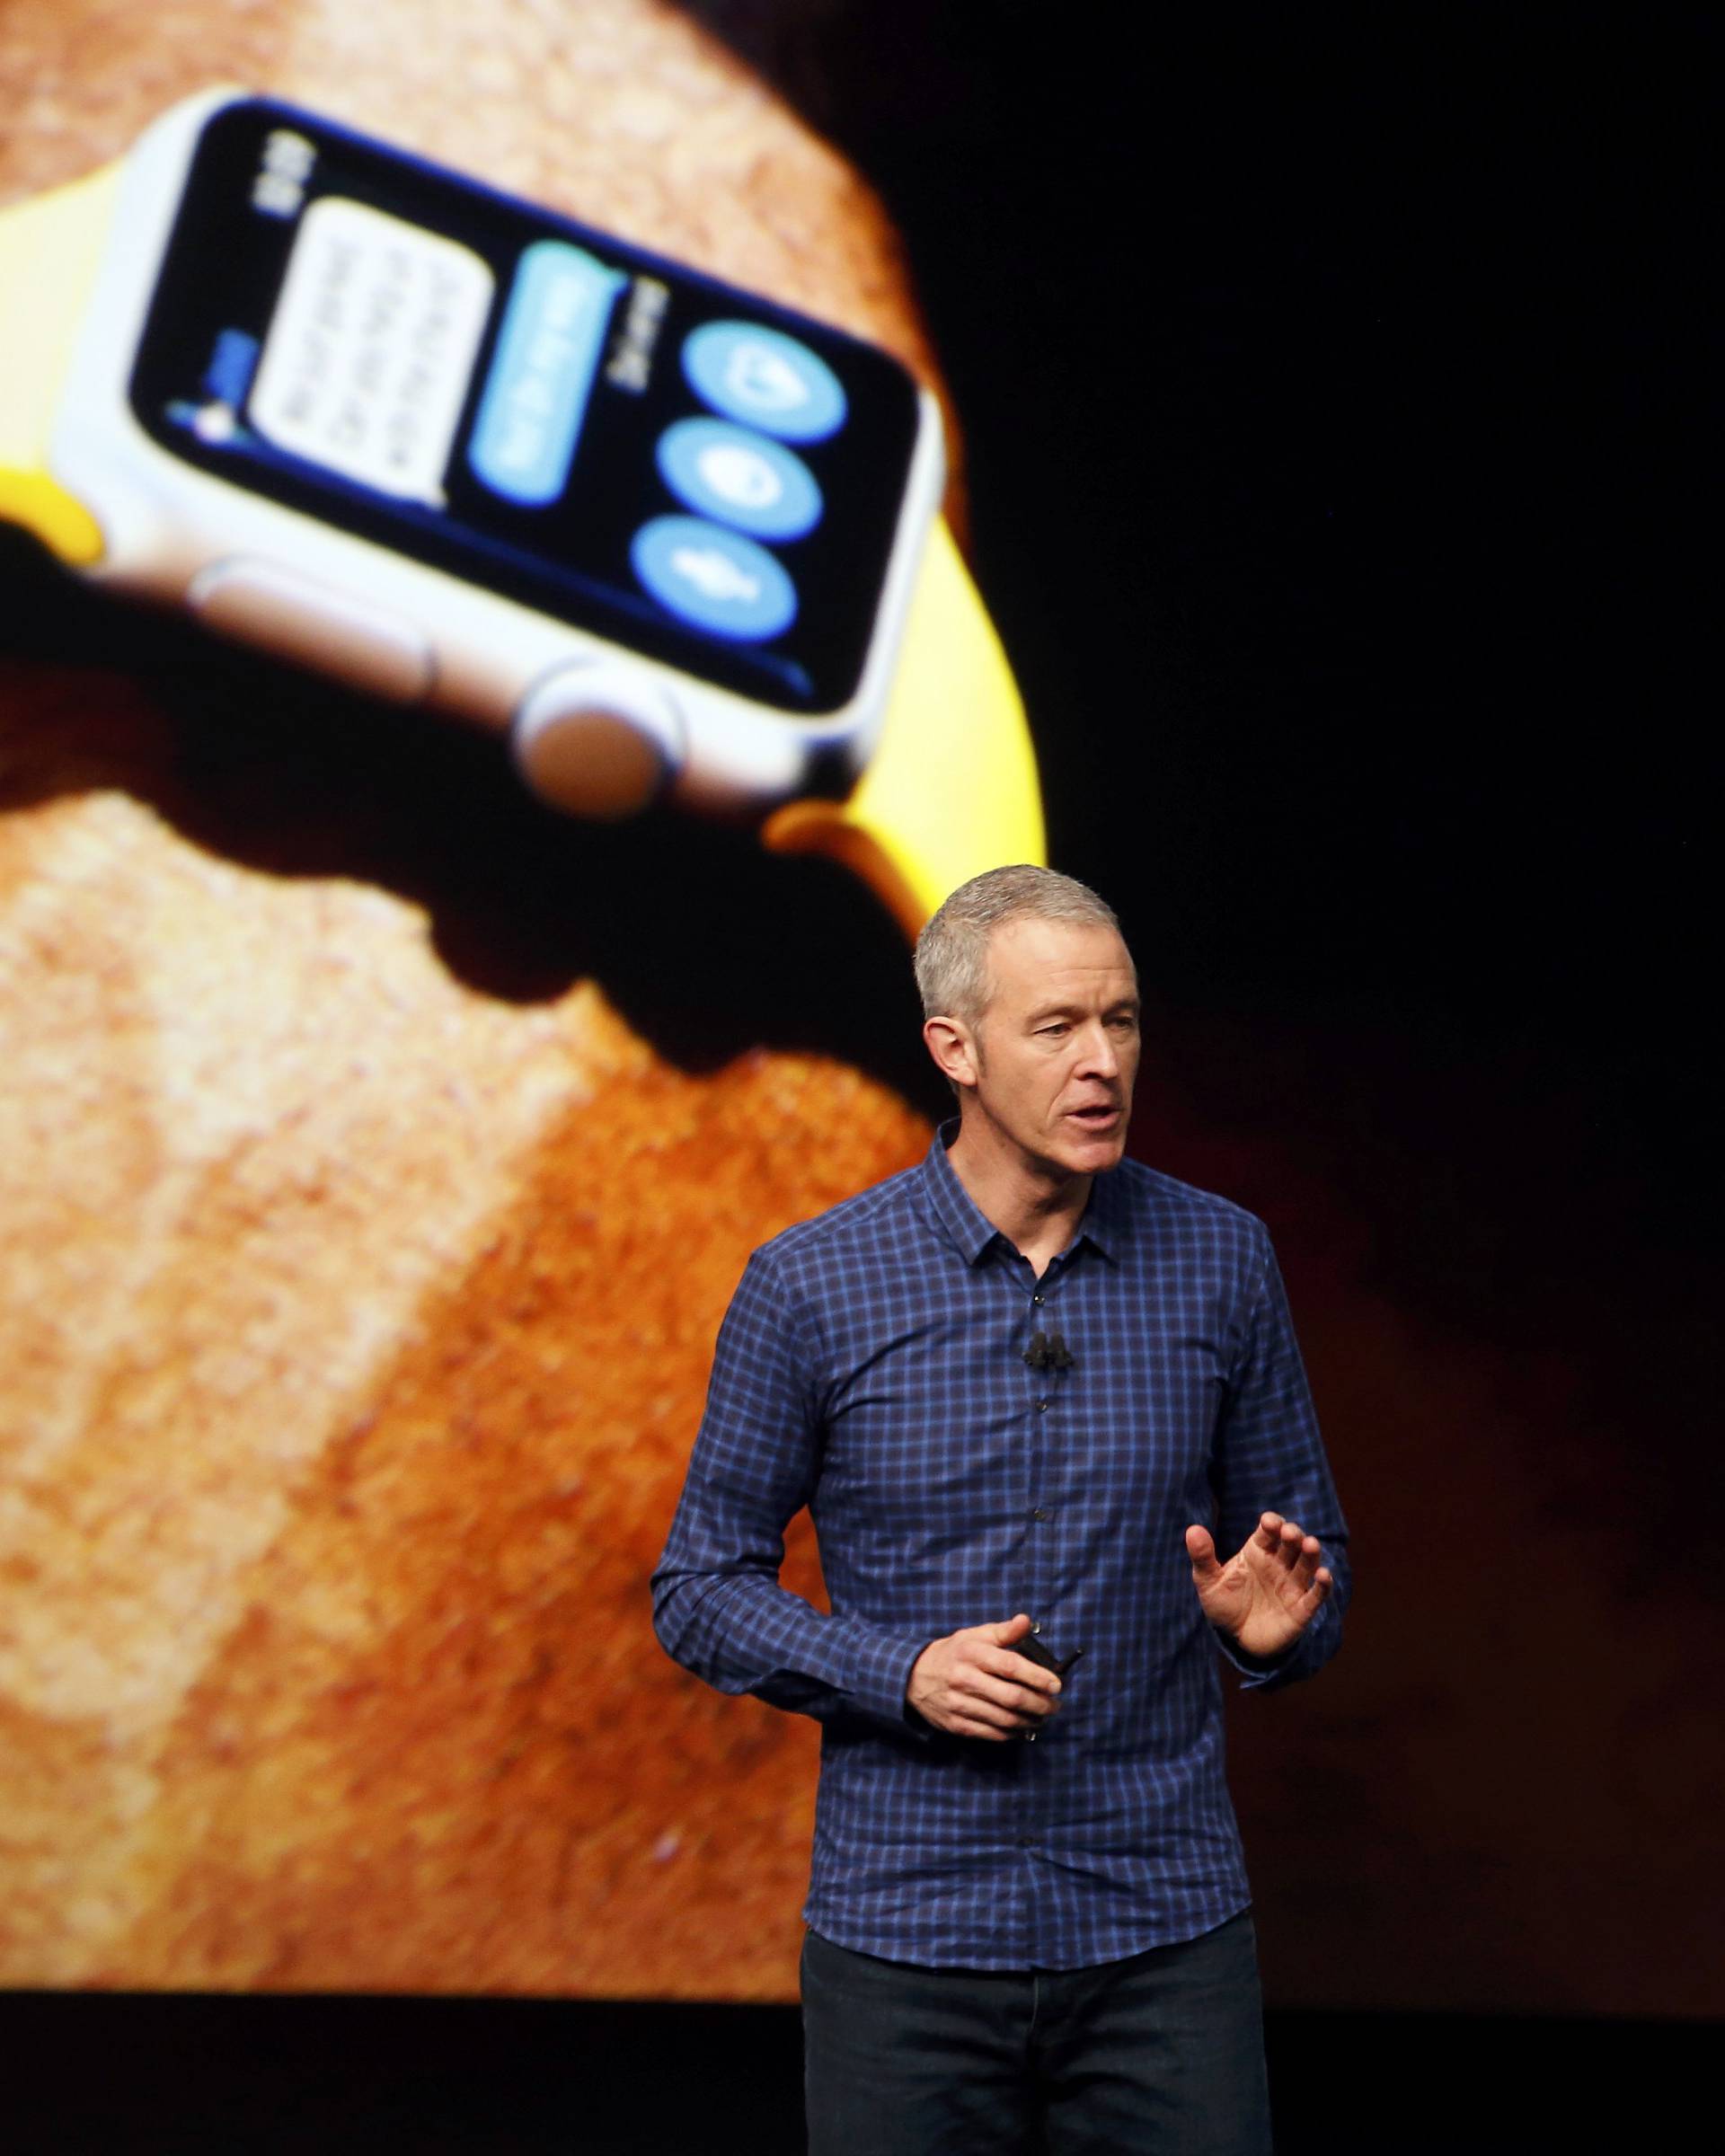 Jeff Williams discusses the Apple Watch Series 2 during an Apple media event in San Francisco